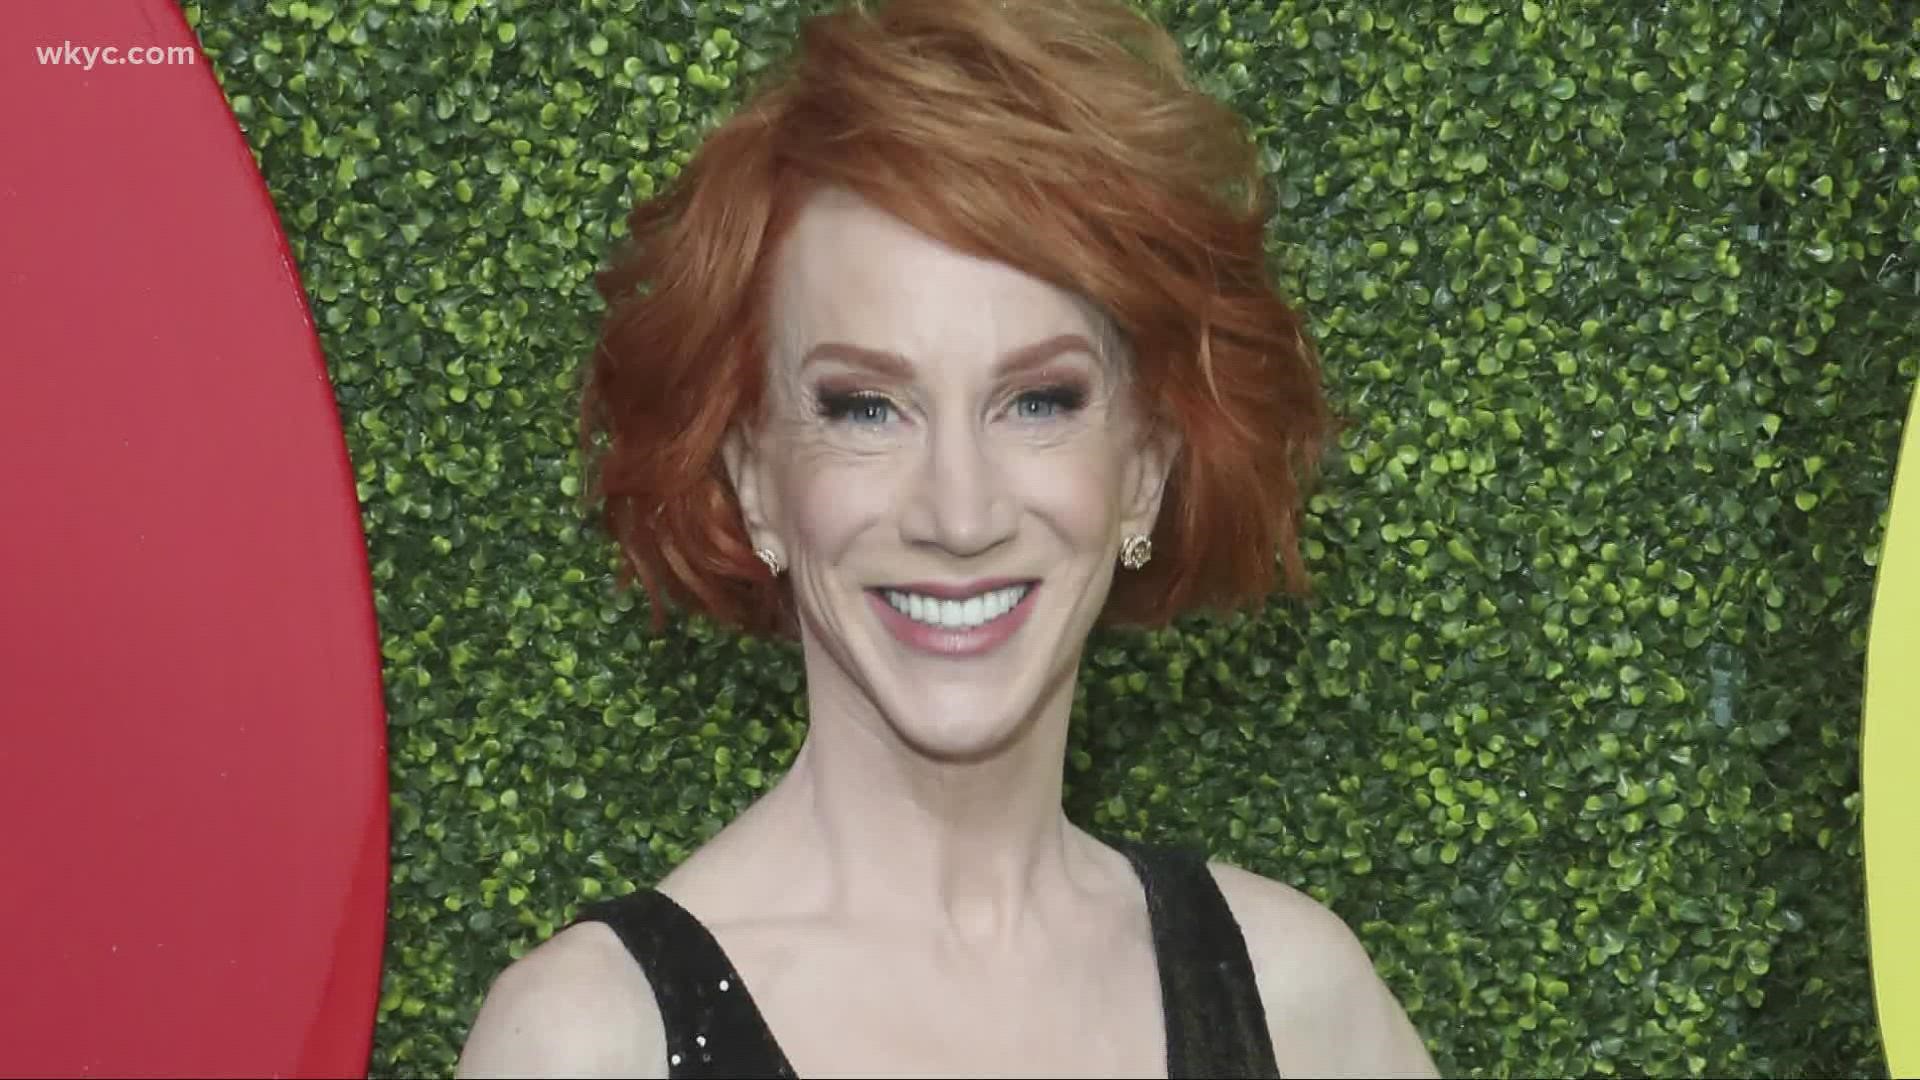 Kathy Griffin says she has been diagnosed with lung cancer despite never smoking. Nightbirde withdraws from AGT due to worsening health. Kierra Cotton has more.